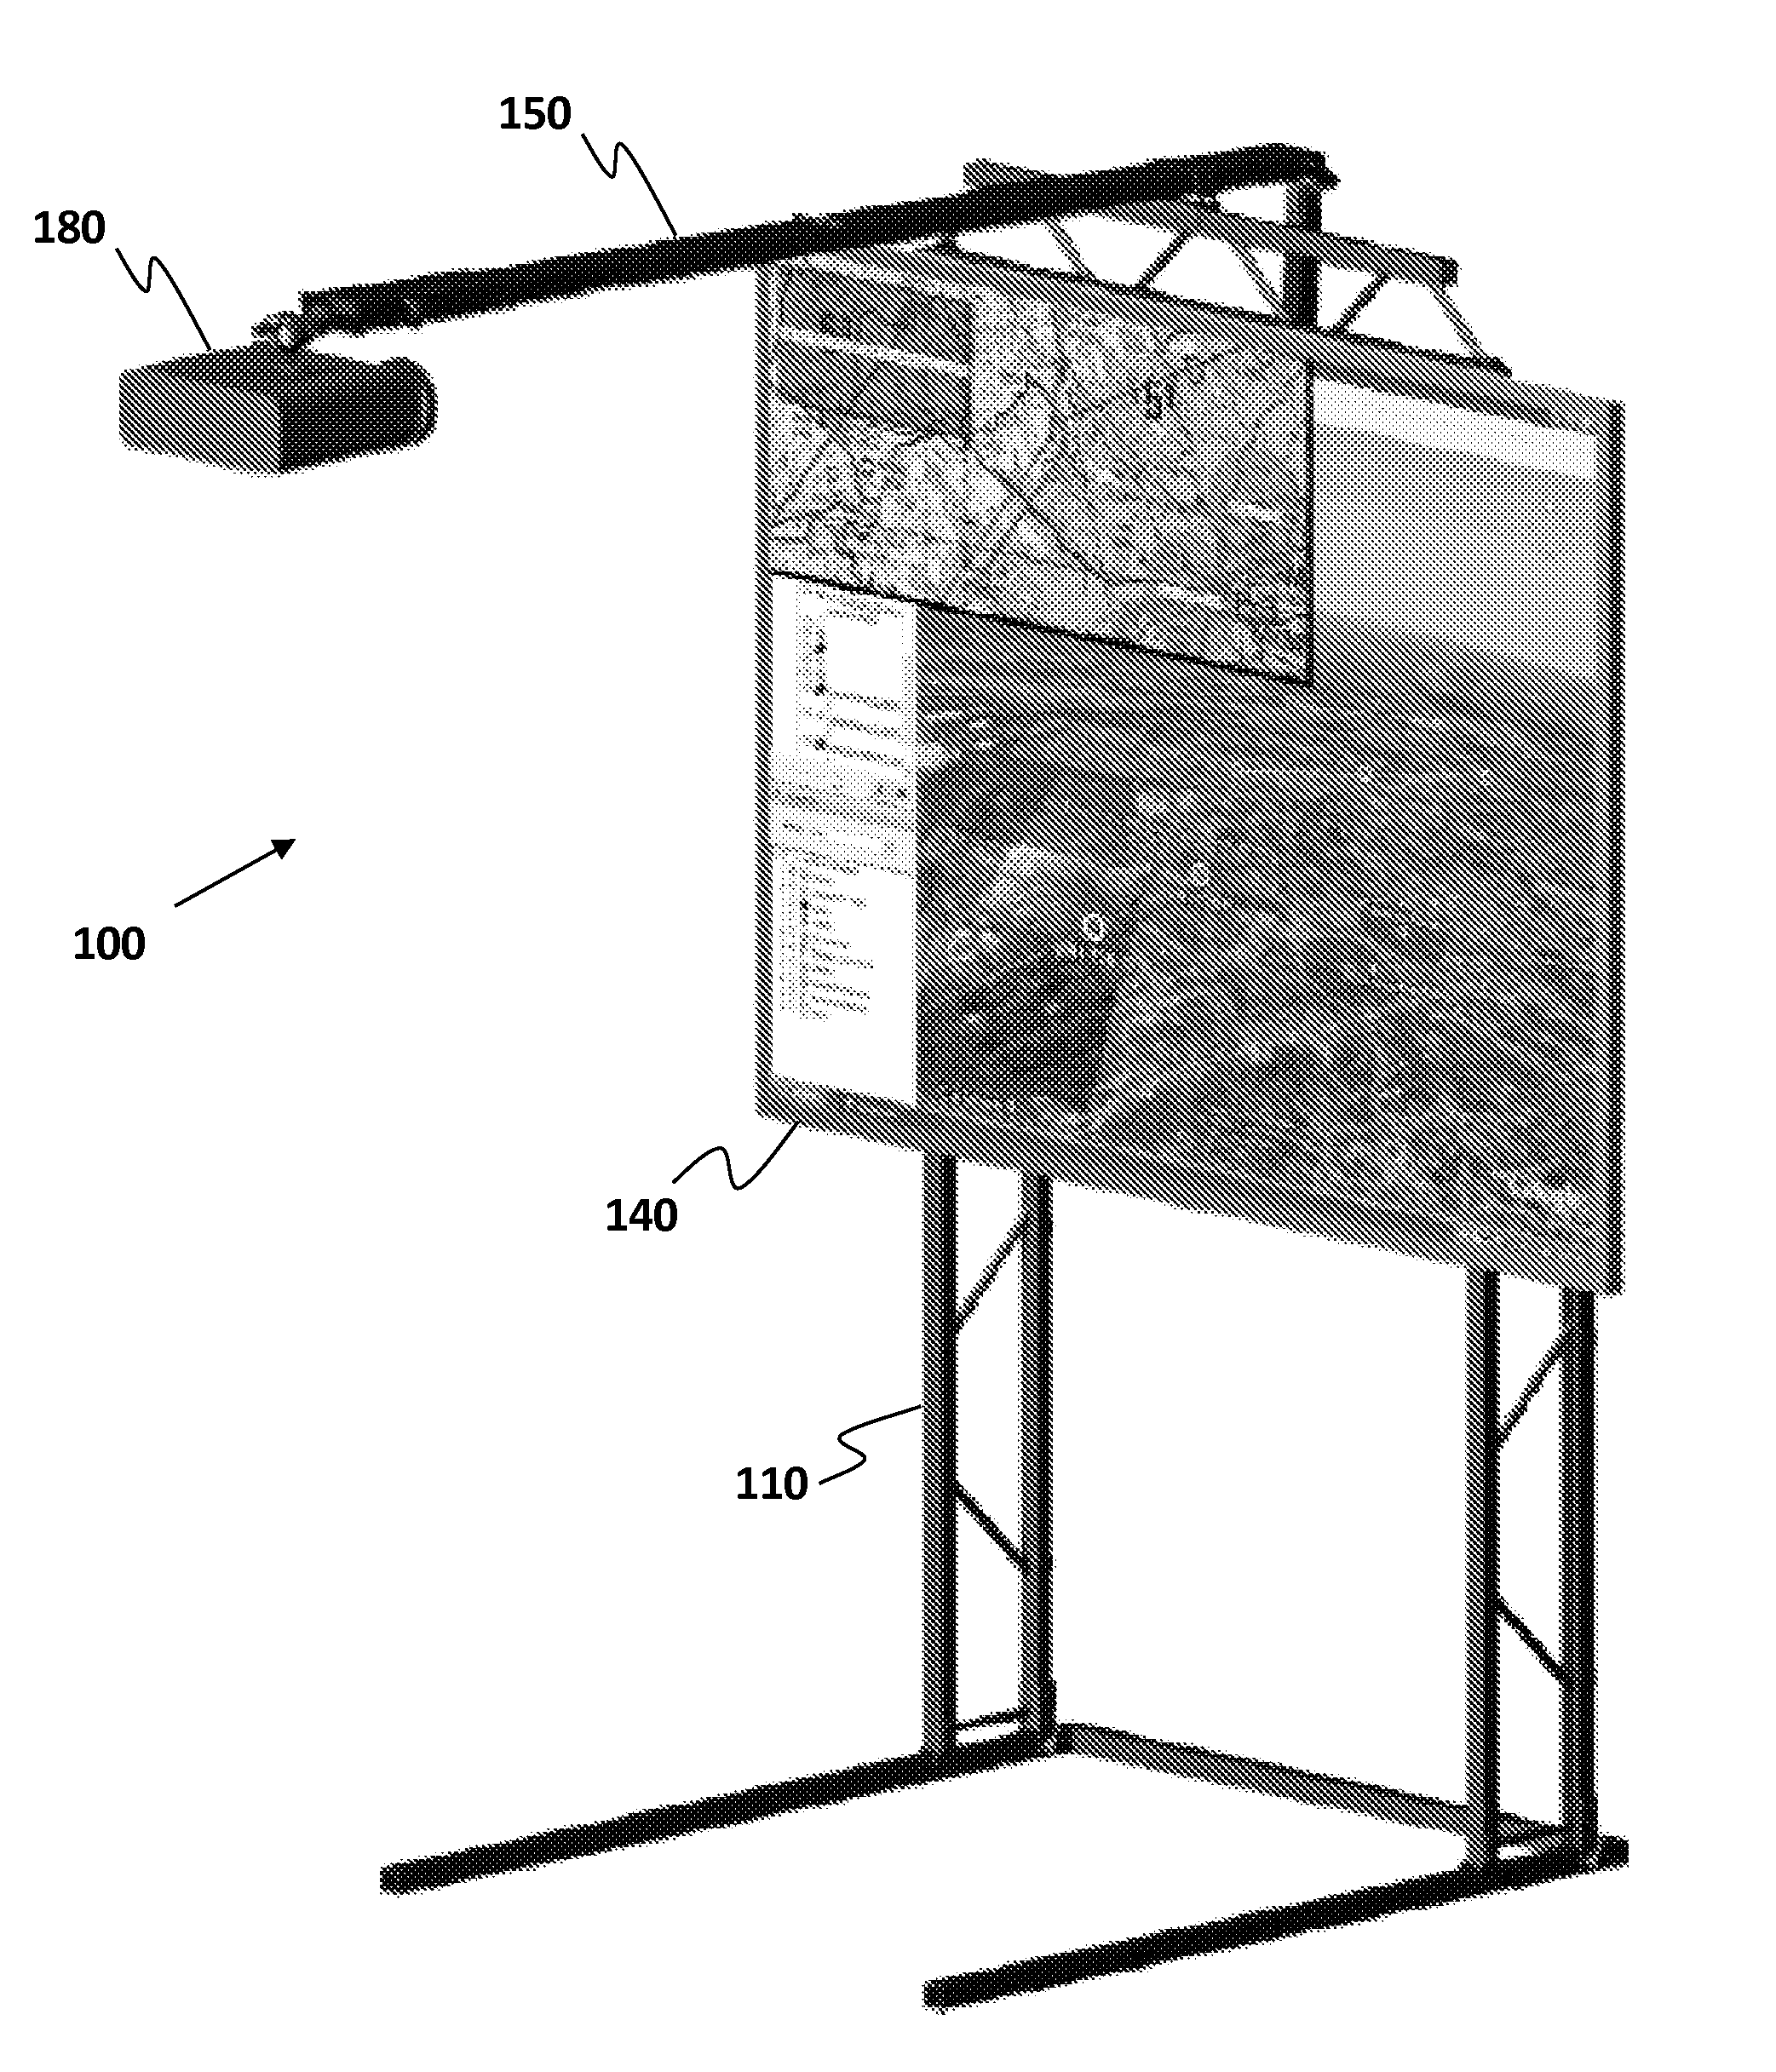 Portable projector and screen support system having foldable frame assembly